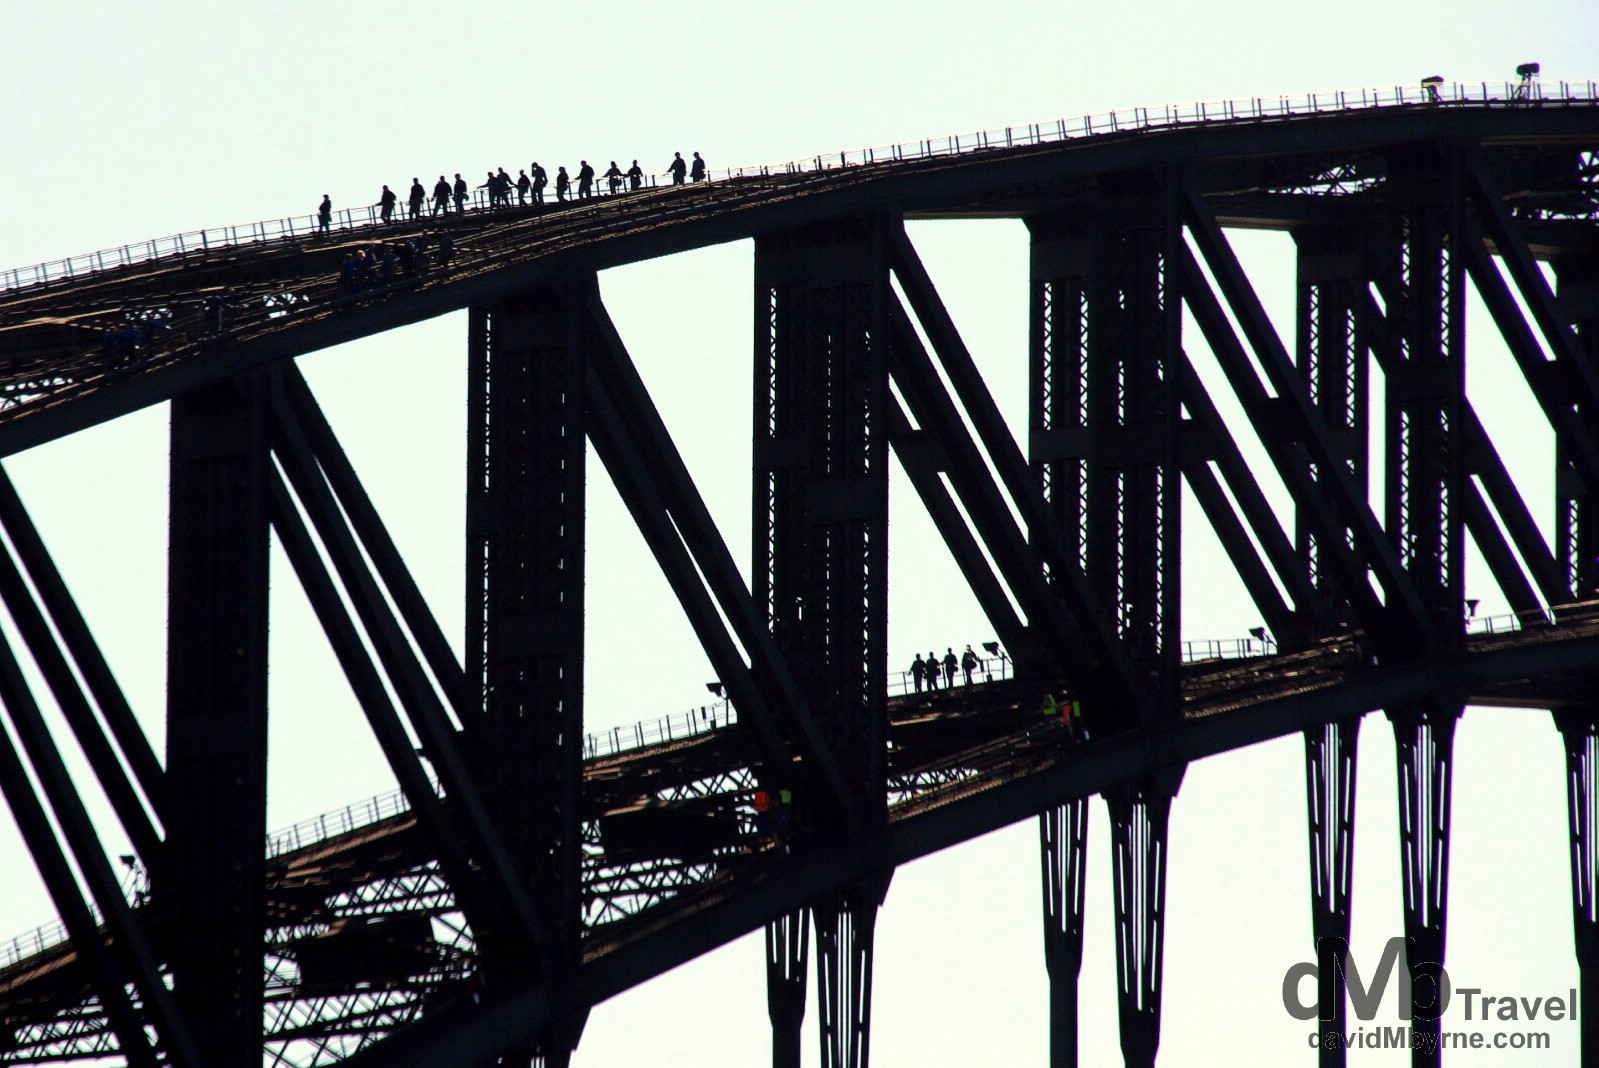 Climbers on the Sydney Harbour Bridge as seen from the Manly Ferry in Sydney Cove, Sydney, Australia. June 8th 2012. 